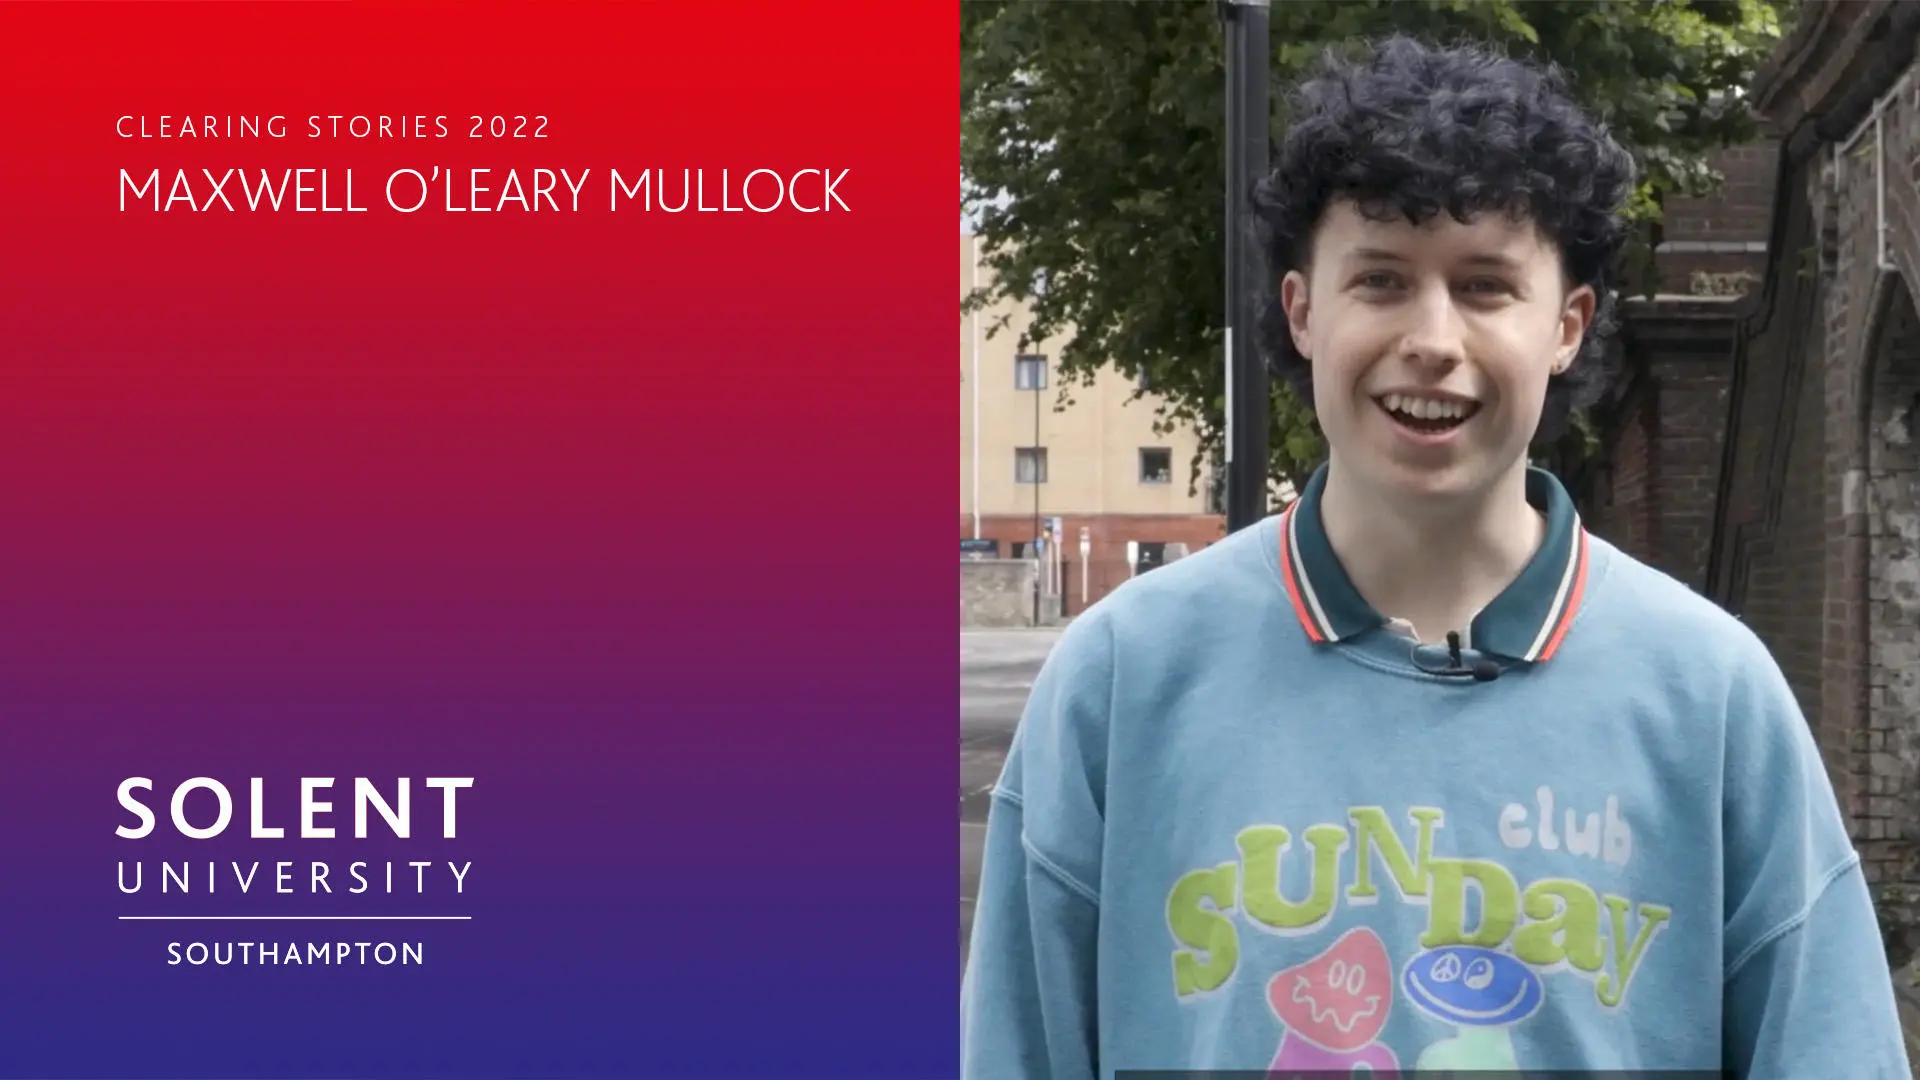 On the left of the screen is a red to purple gradient (portrait) with white copy over the top which reads 'Maxwell O'Leary Mullock' with the Solent University, Southampton logo bottom left. To the right is a photo of Max, who is looking off camera and smiling.